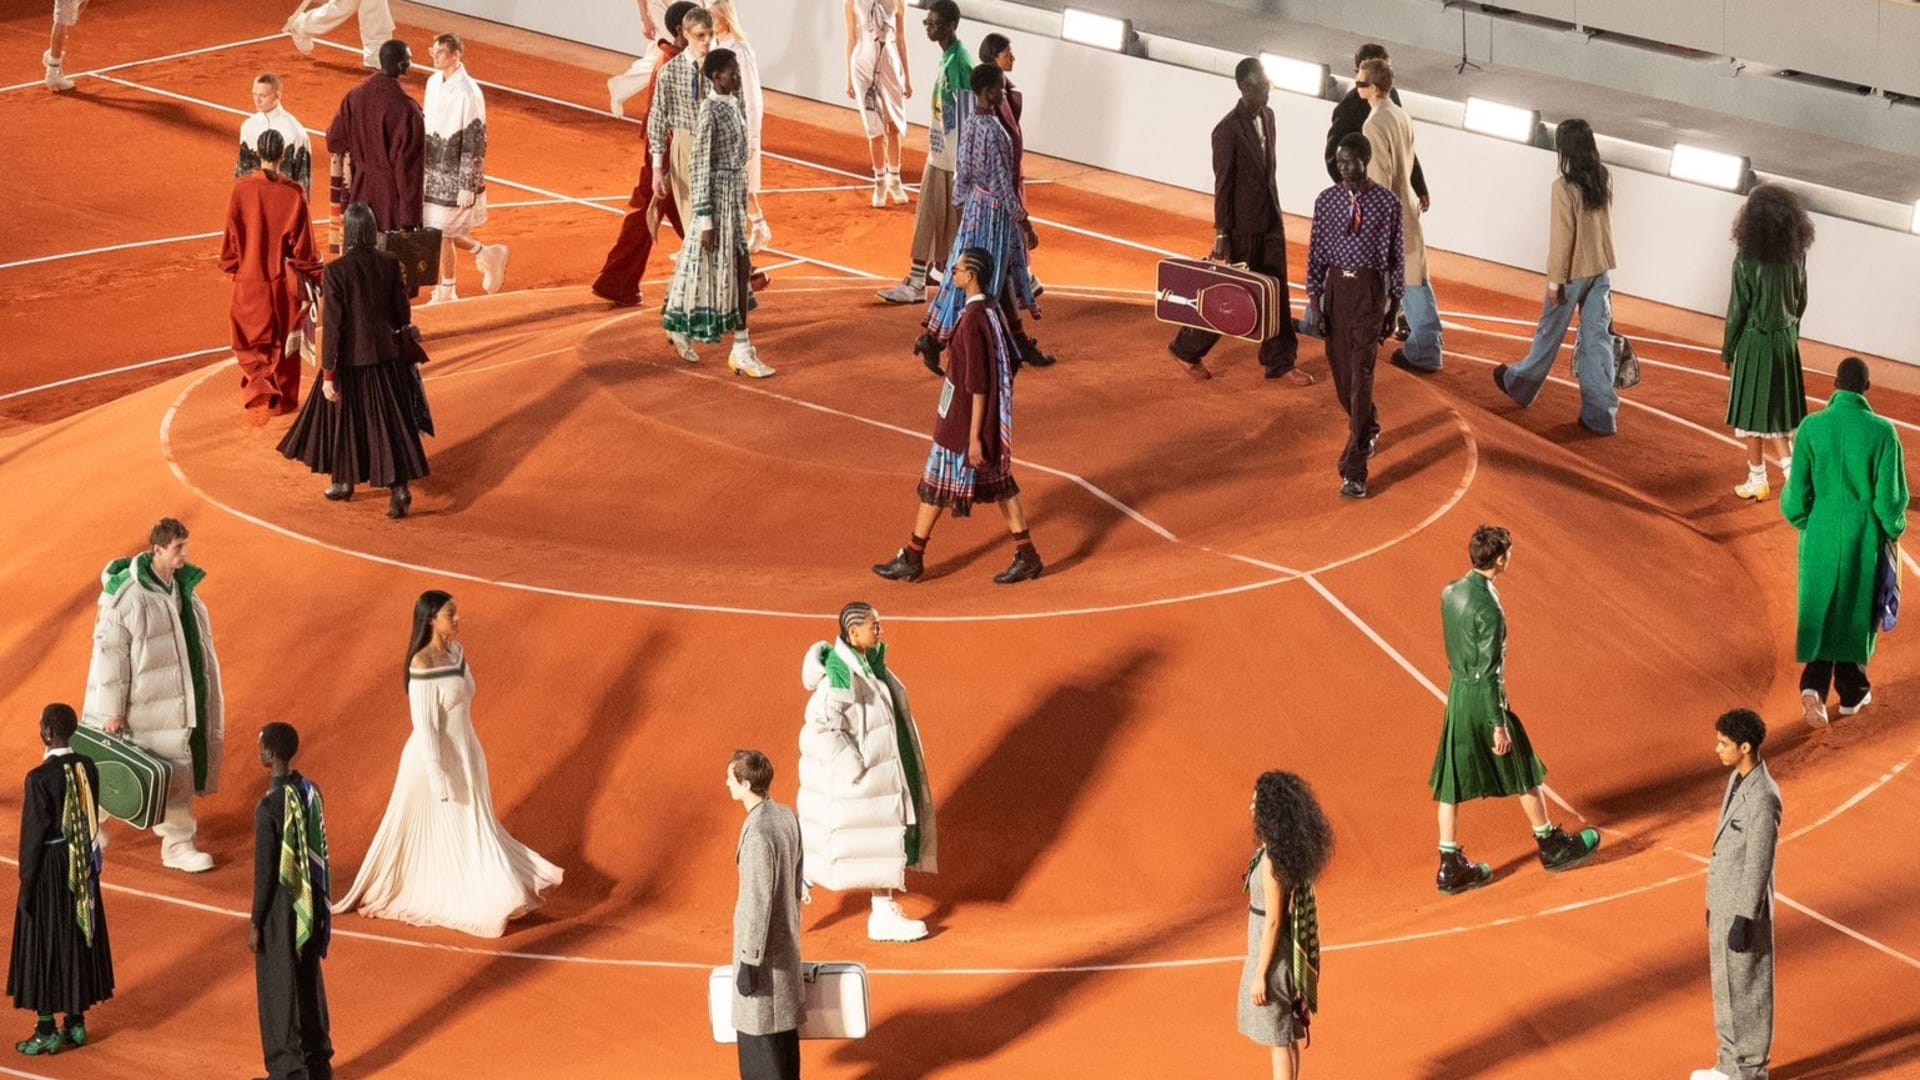 Lacoste returns to its roots for Paris Fashion Week show at Roland Garros